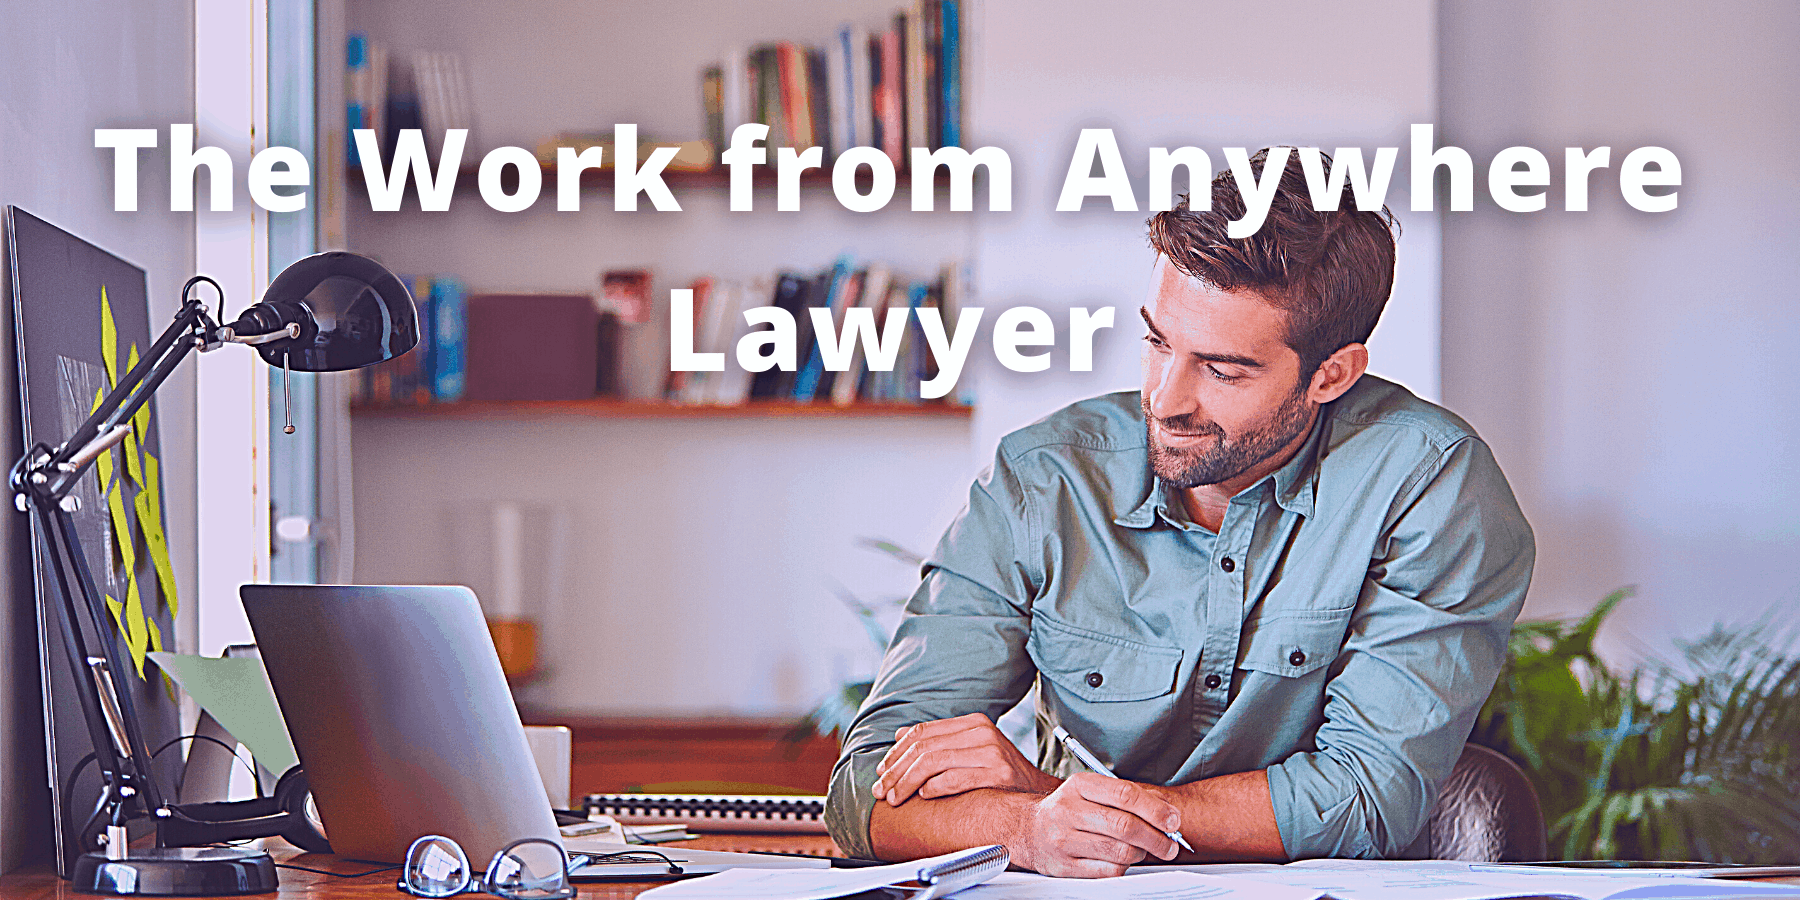 Man Working. Text reads The Work from Anywhere Lawyer